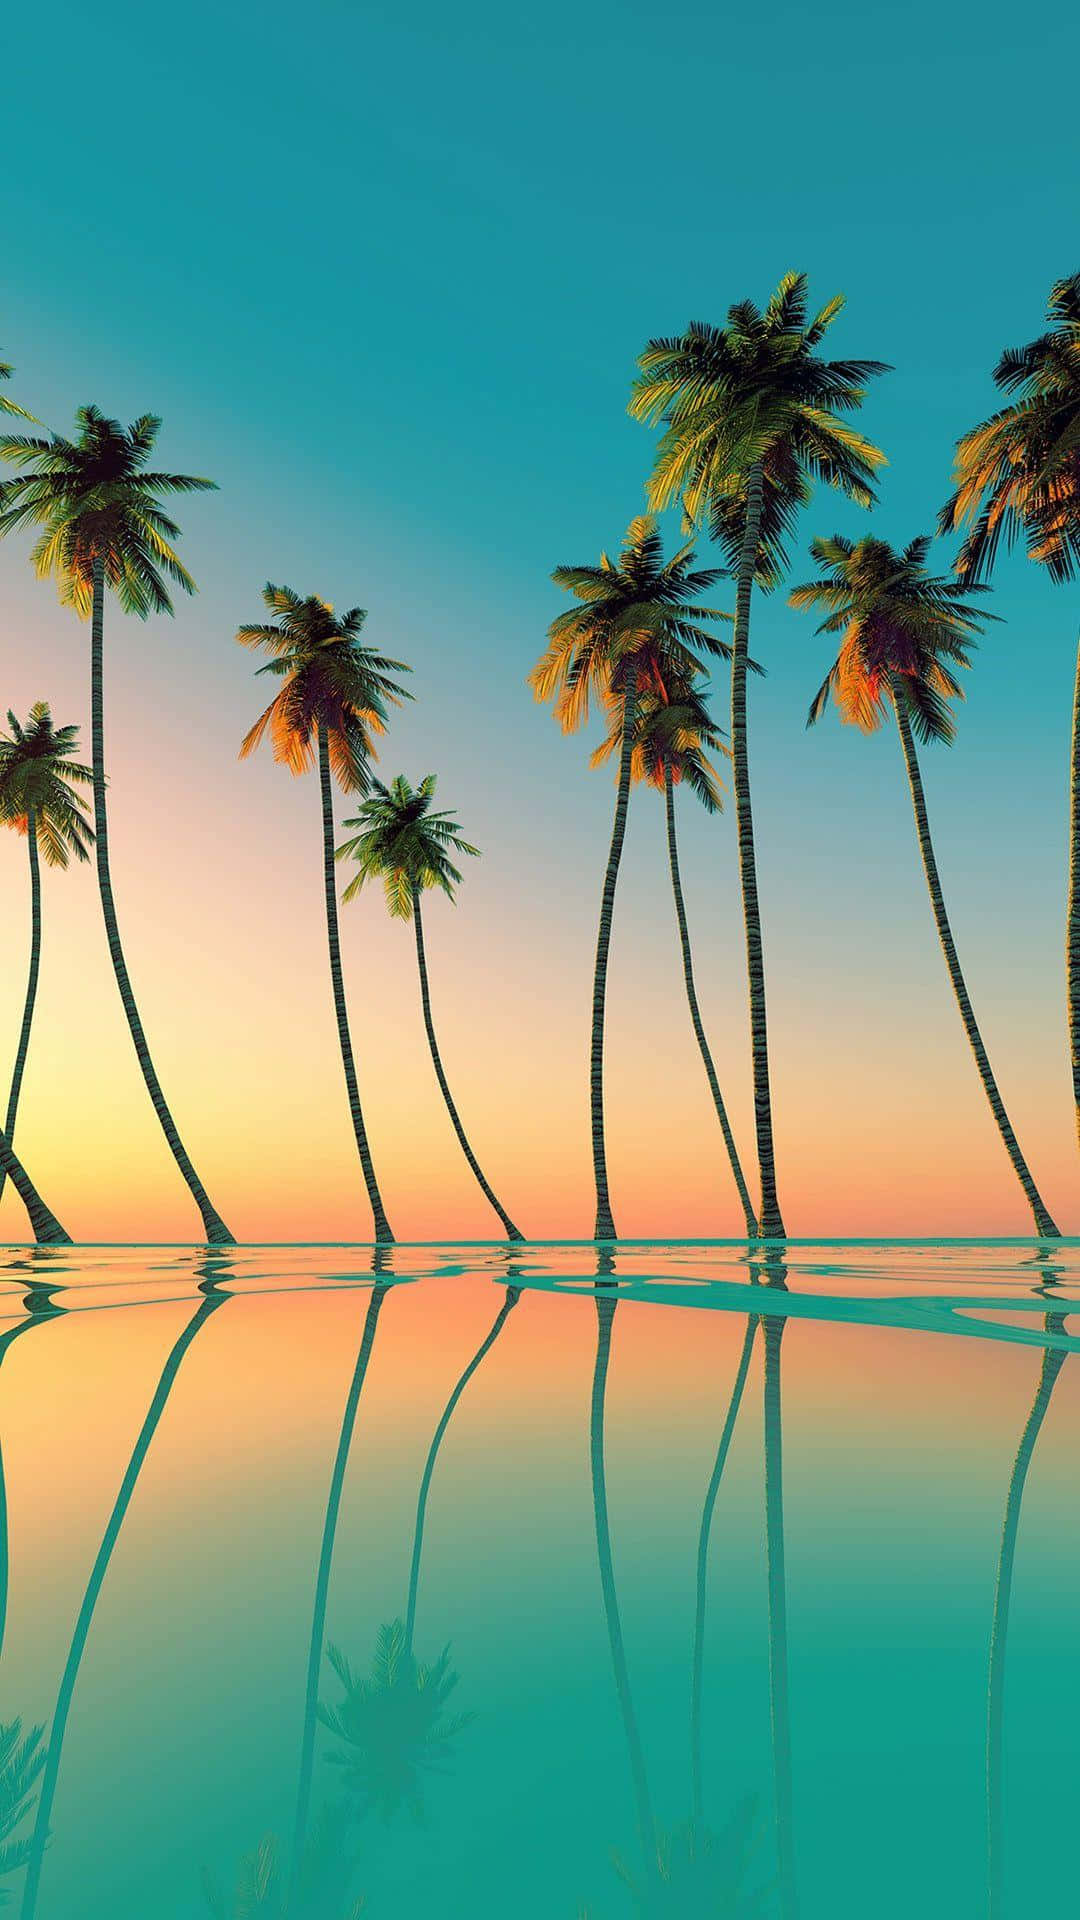 Palm Trees In The Water At Sunset Wallpaper